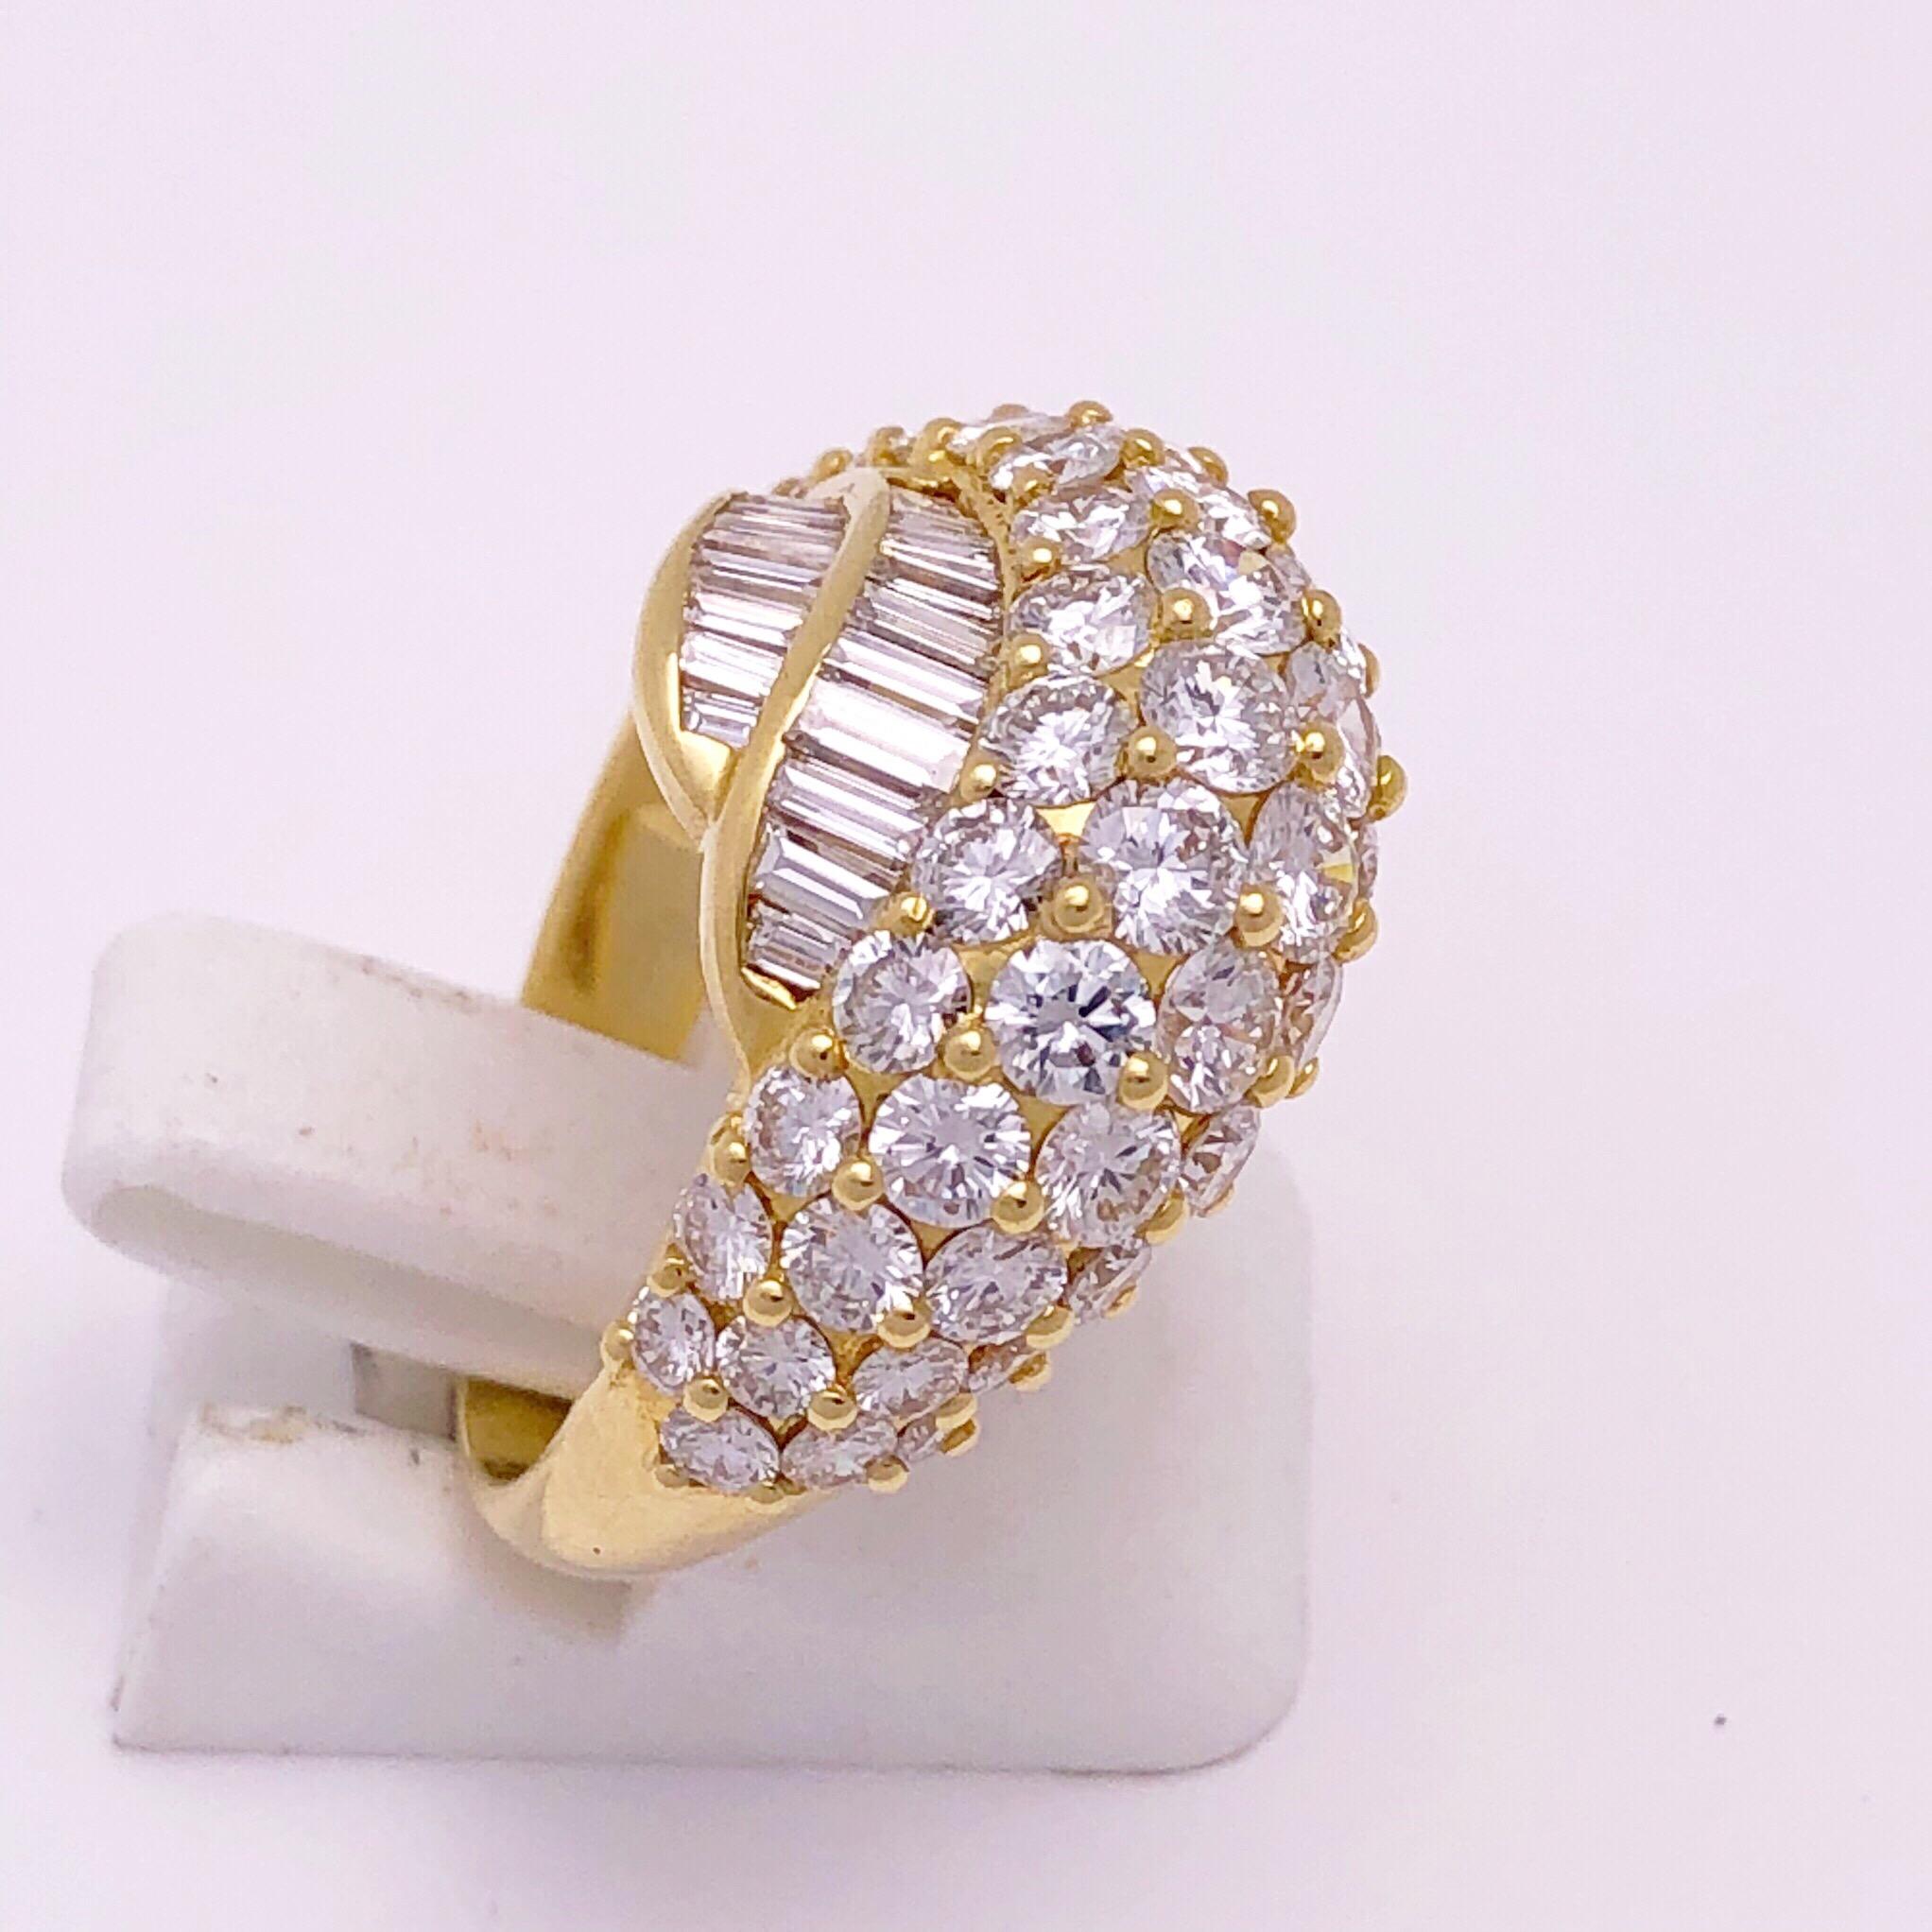 This gorgeous 18 KT yellow gold diamond ring is handcrafted by the renowned Italian designer Picchiotti.
This ring has been meticulously set with four rows of round brilliant cut diamonds weighing 3.25 carats and two rows of baguette cut diamonds